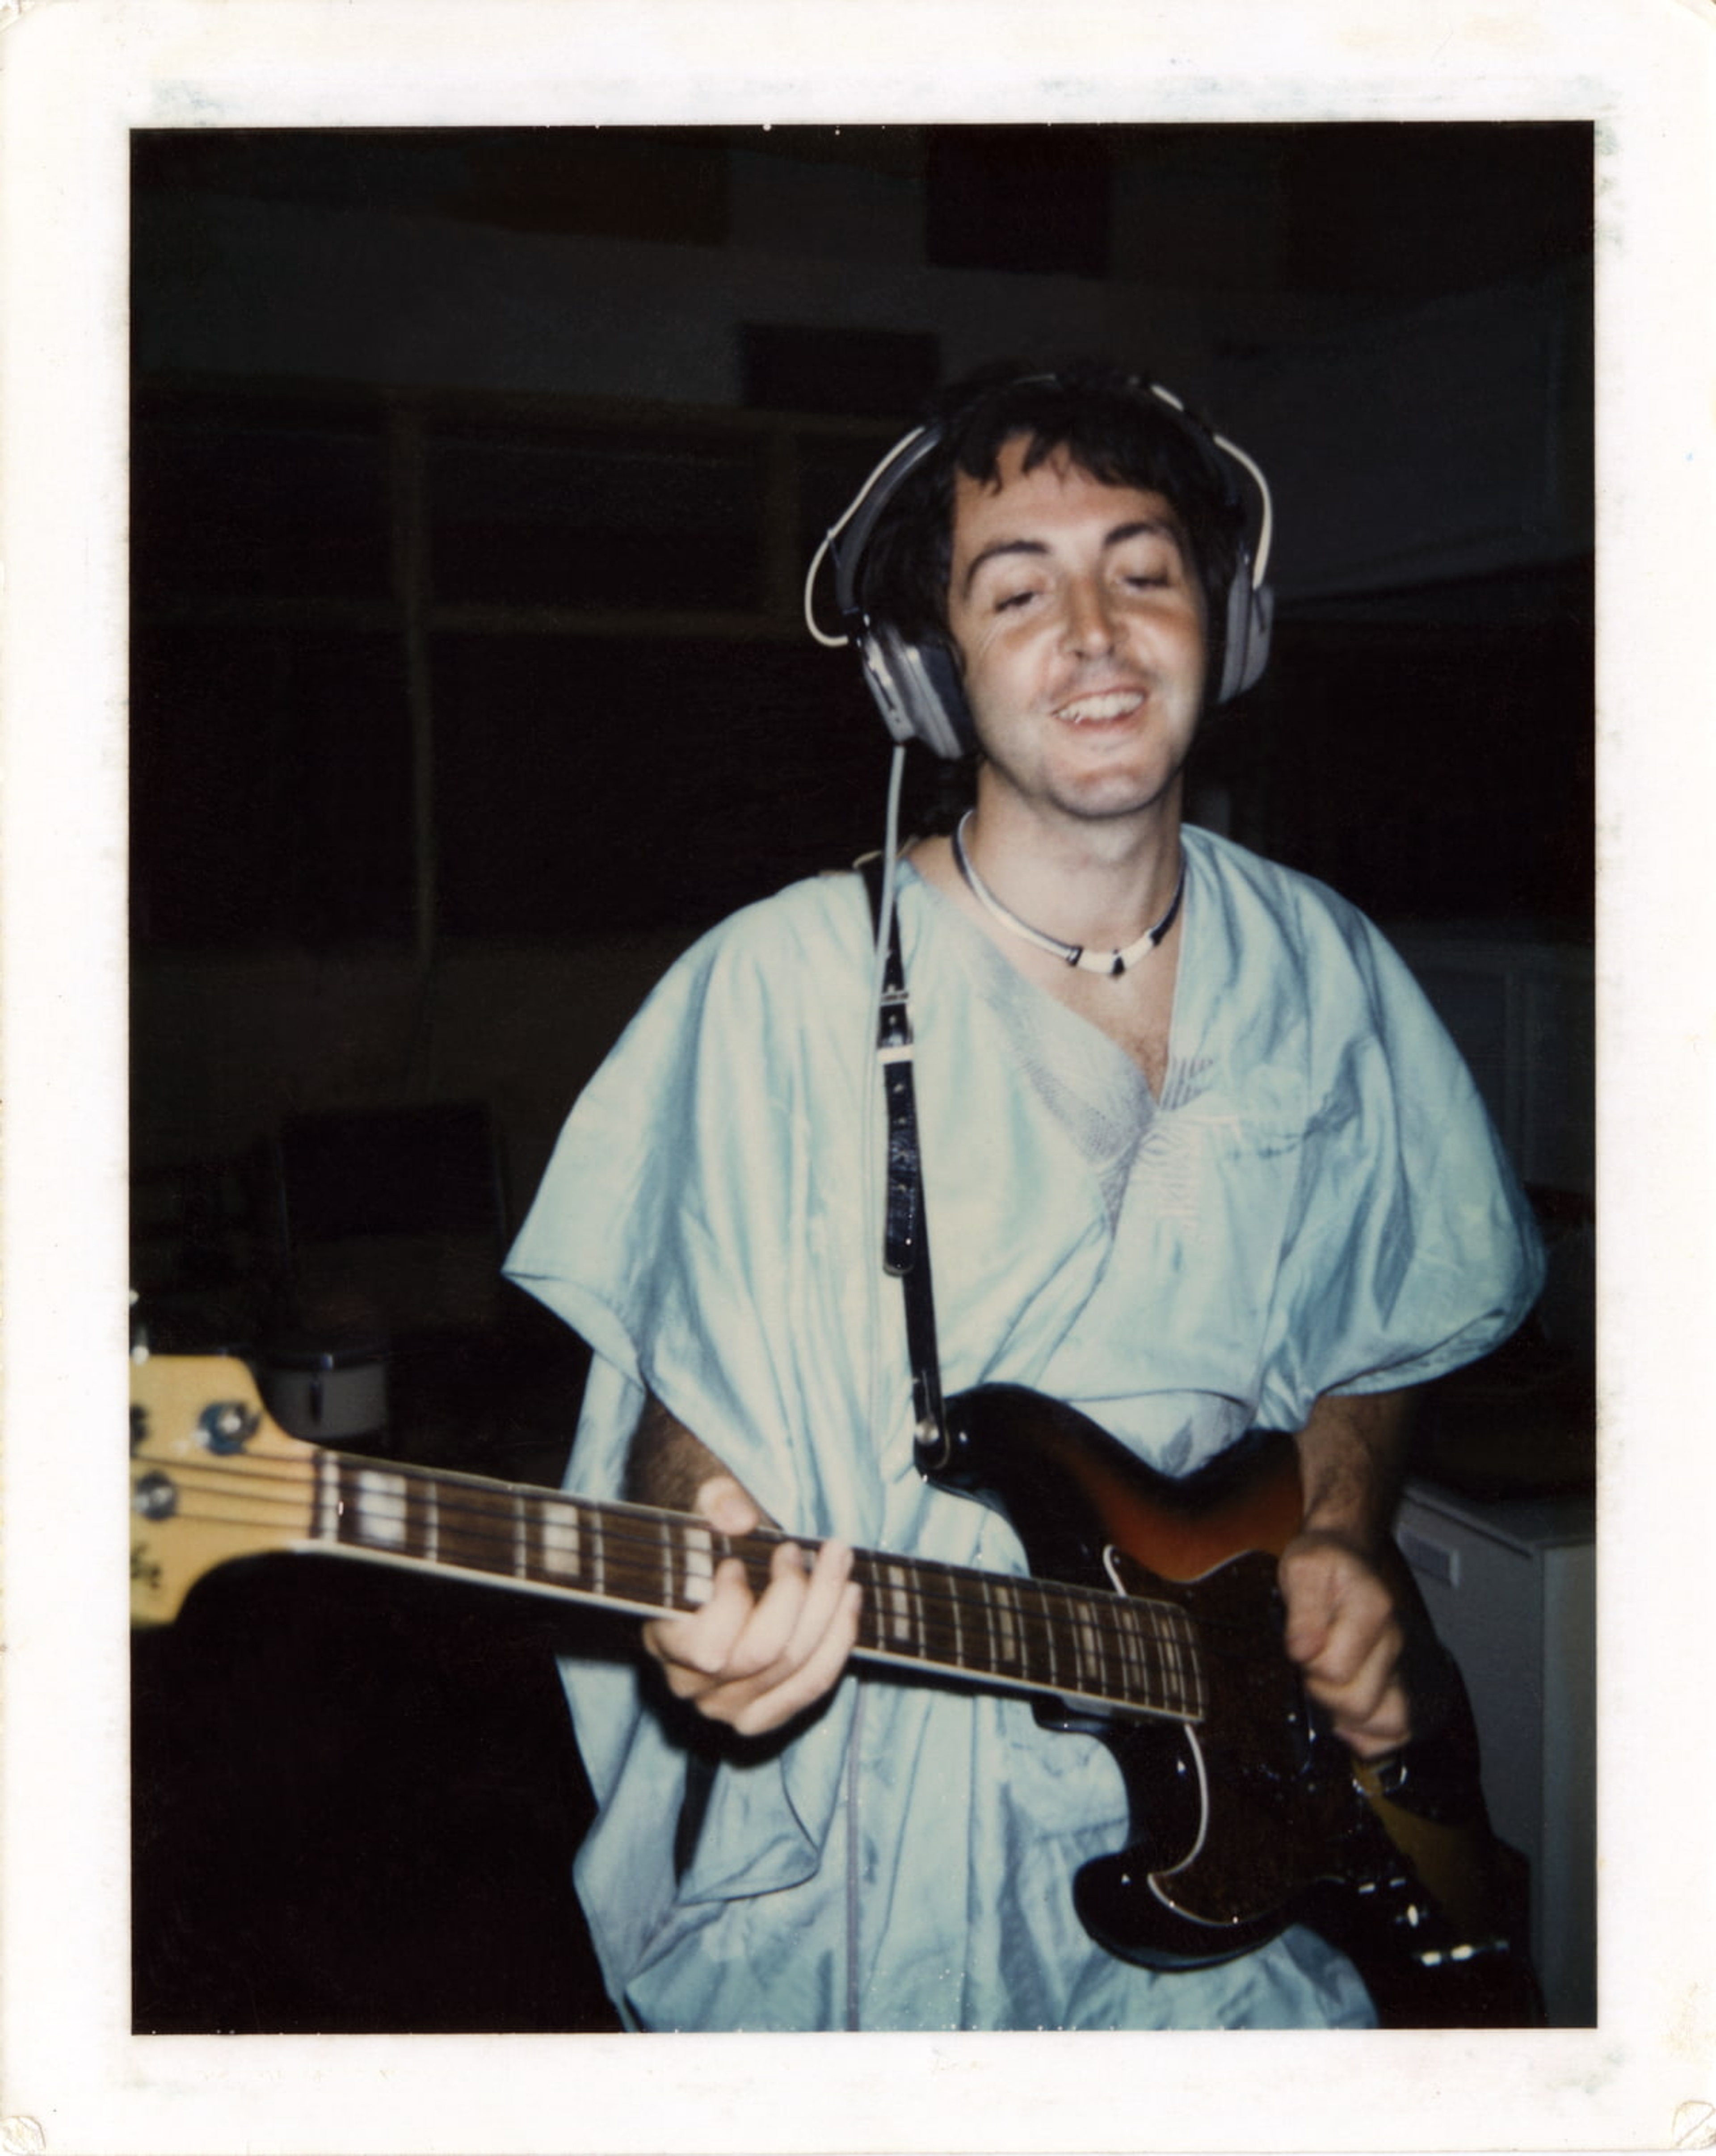 Polaroid photo of Paul playing guitar in the studio